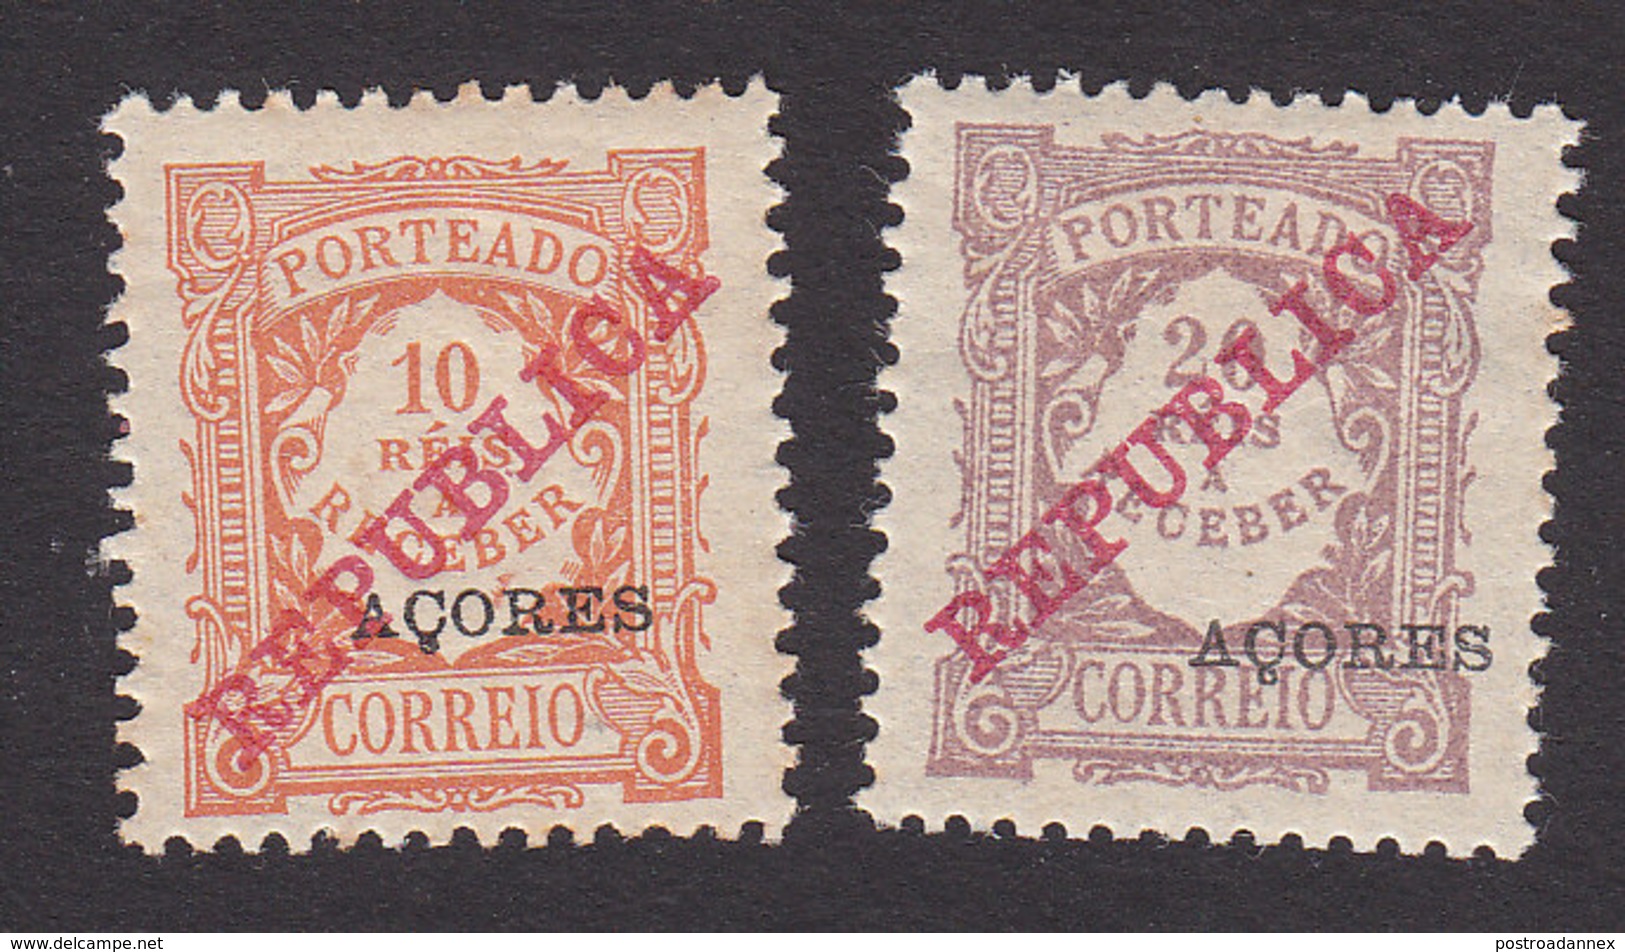 Azores, Scott #J9-J10, Mint Hinged, Postage Due Overprinted, Issued 1911 - Azores